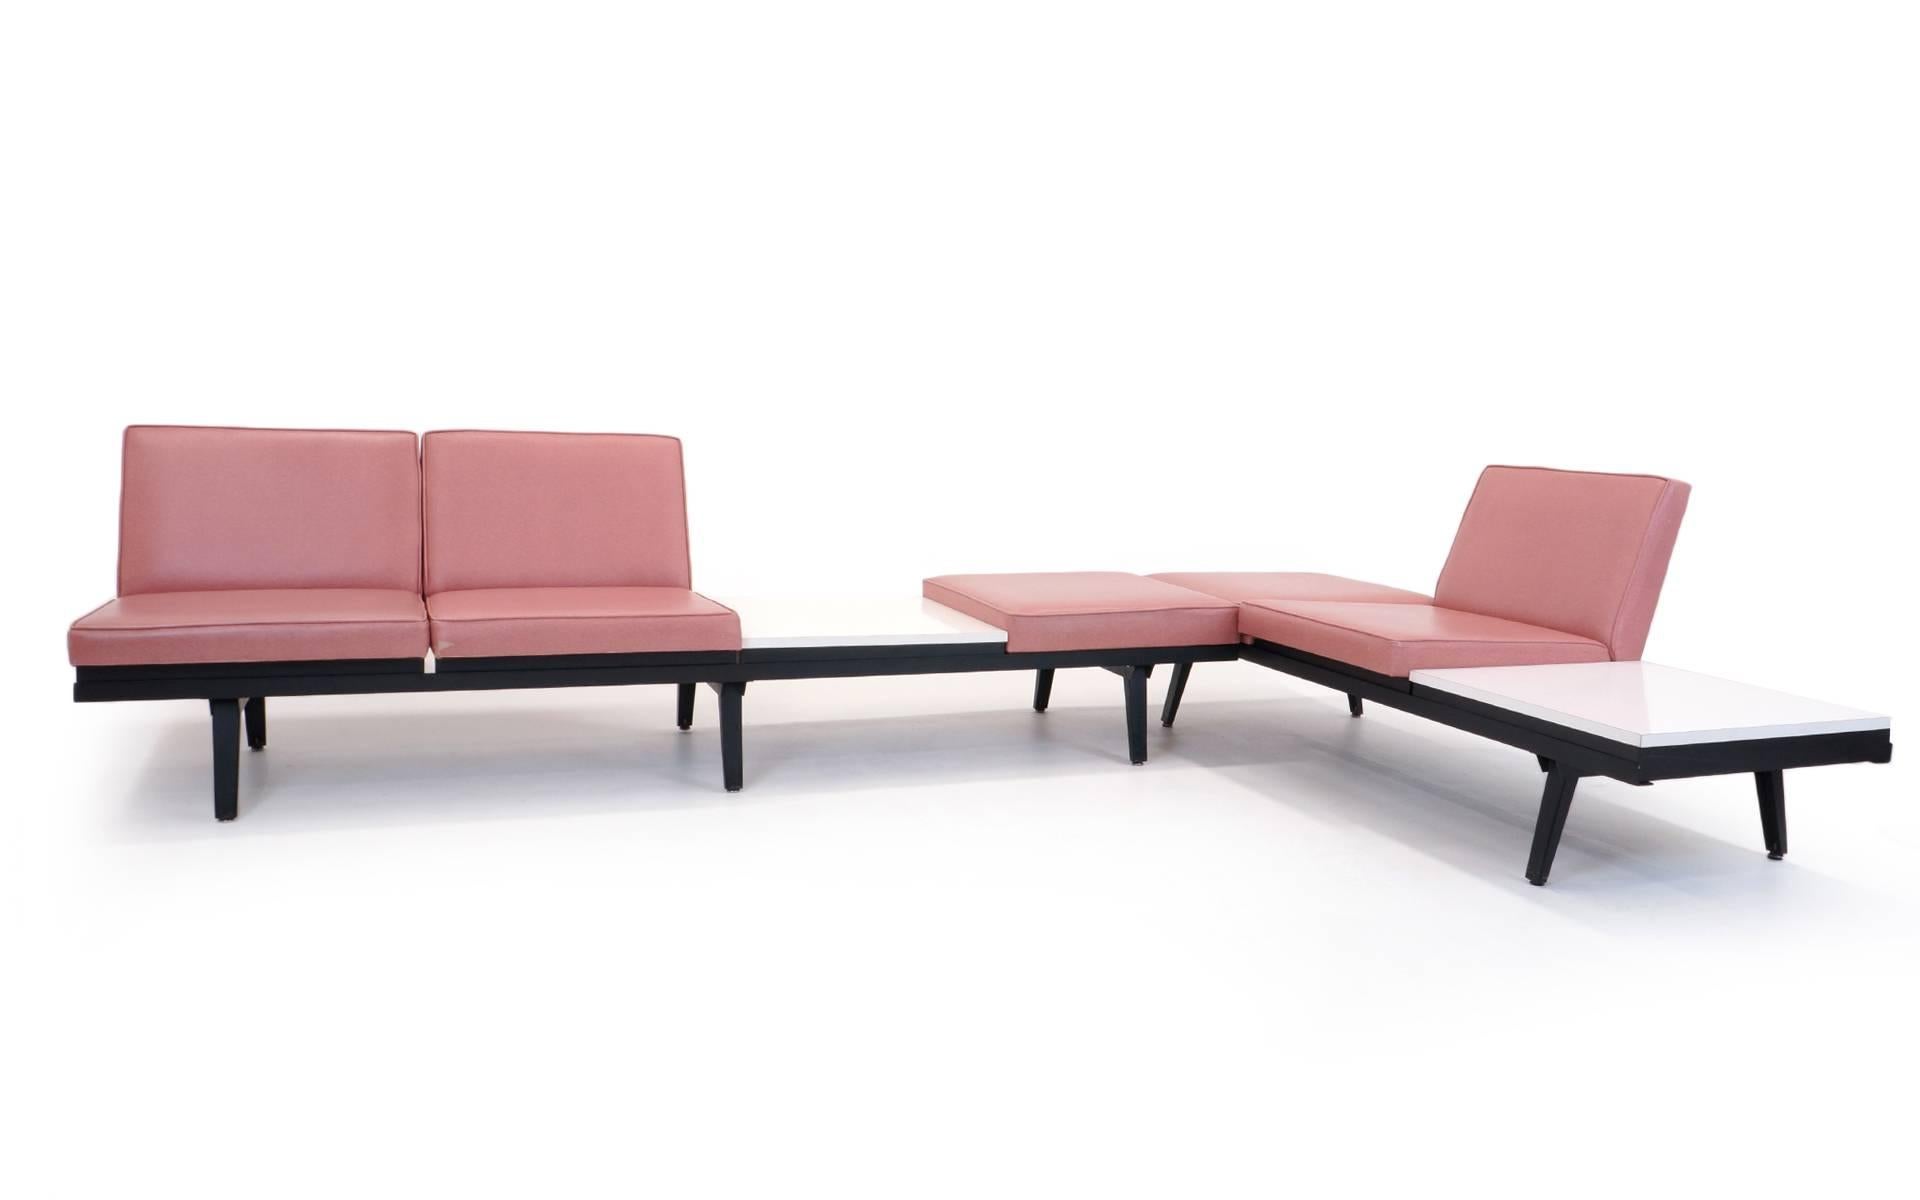 Two George Nelson steel frame sofa / seating units. One is four sections (8 feet long) and the other is three (6 feet long). All of the seats and tables are interchangeable so the options for set up are too many to calculate. The frames are in